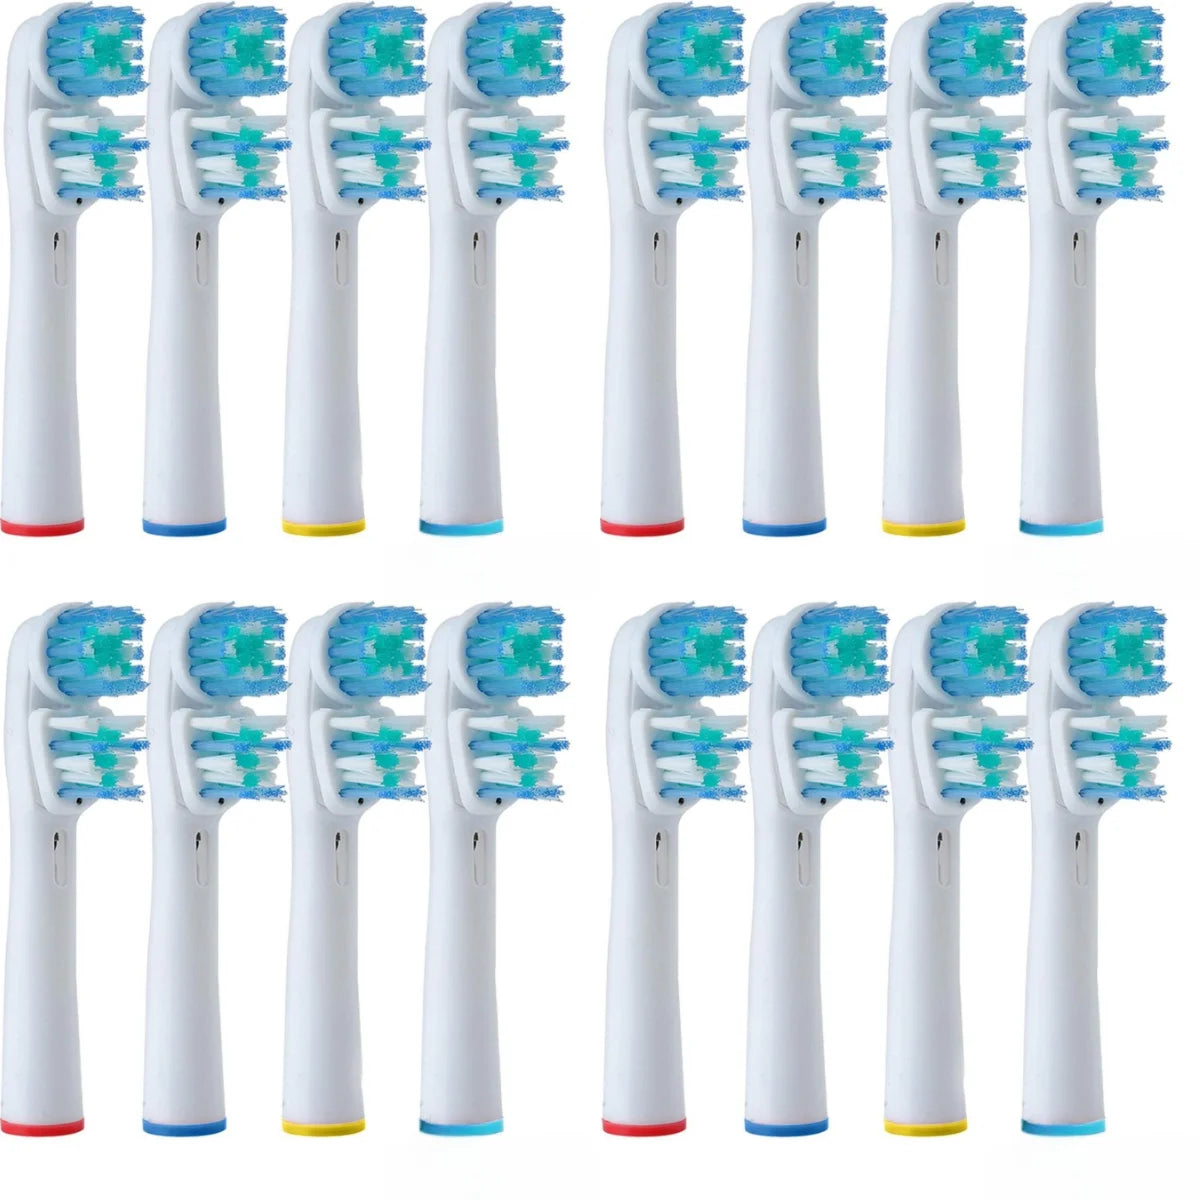 4/8/12/16/20pcs Generic Electric Toothbrush Replacement Heads Refill Compatible with Braun Oral-B Dual Clean Electric Toothbrush